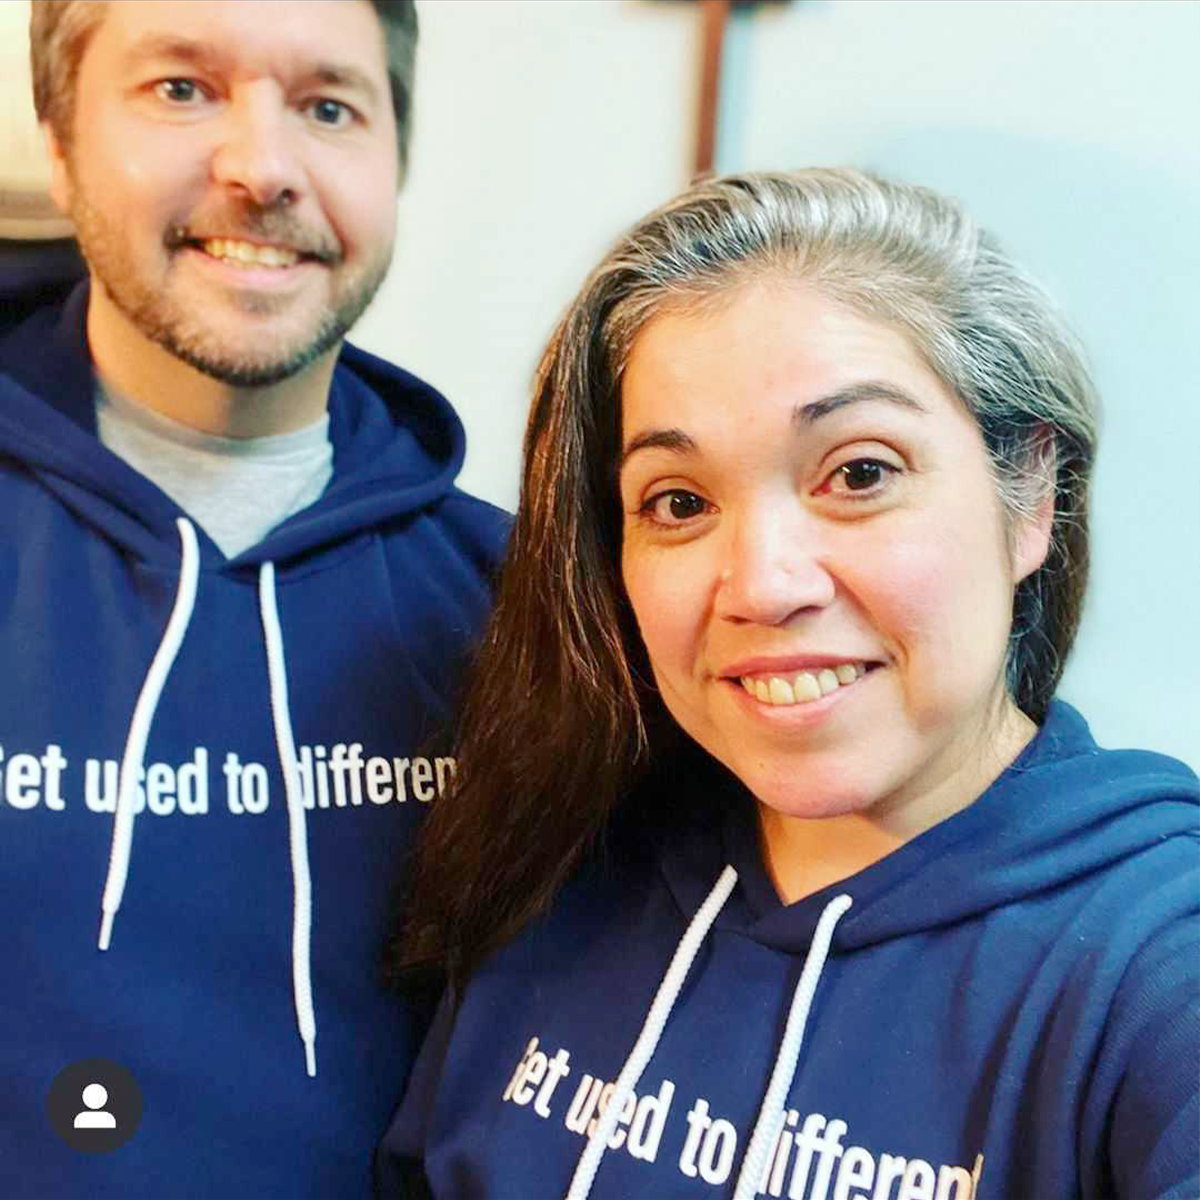 Get used to different Chosen Hoodie (Limited Edition) Couple